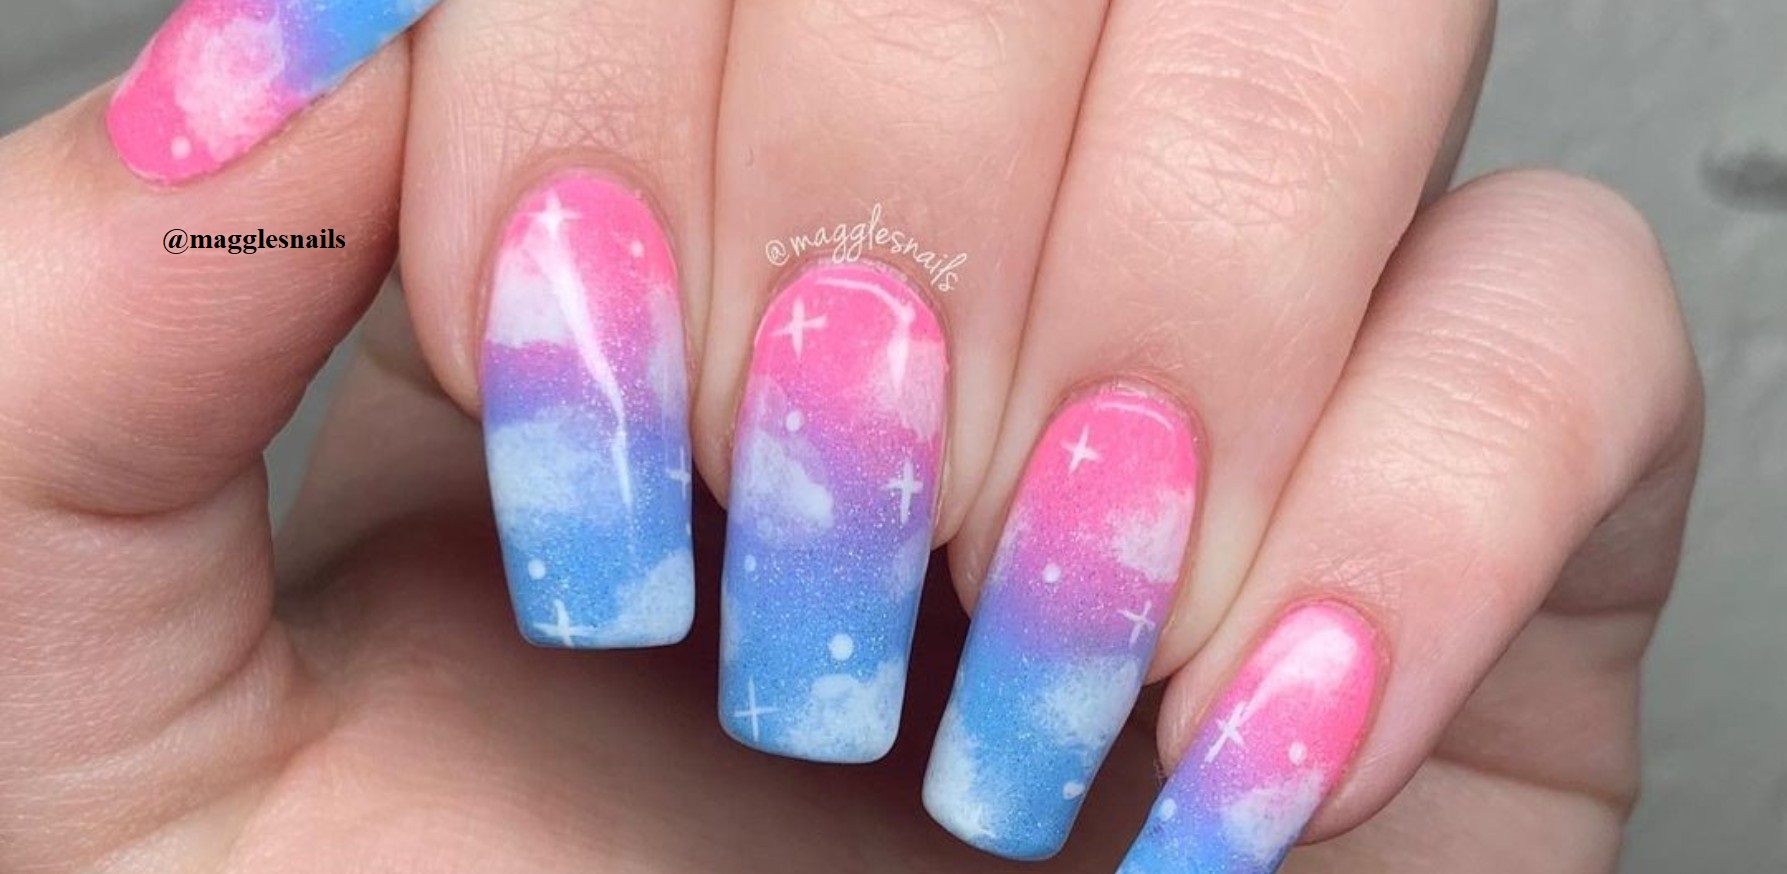 Dreamy Shades For The Cotton Candy Nails to Soften Your Style This Spring